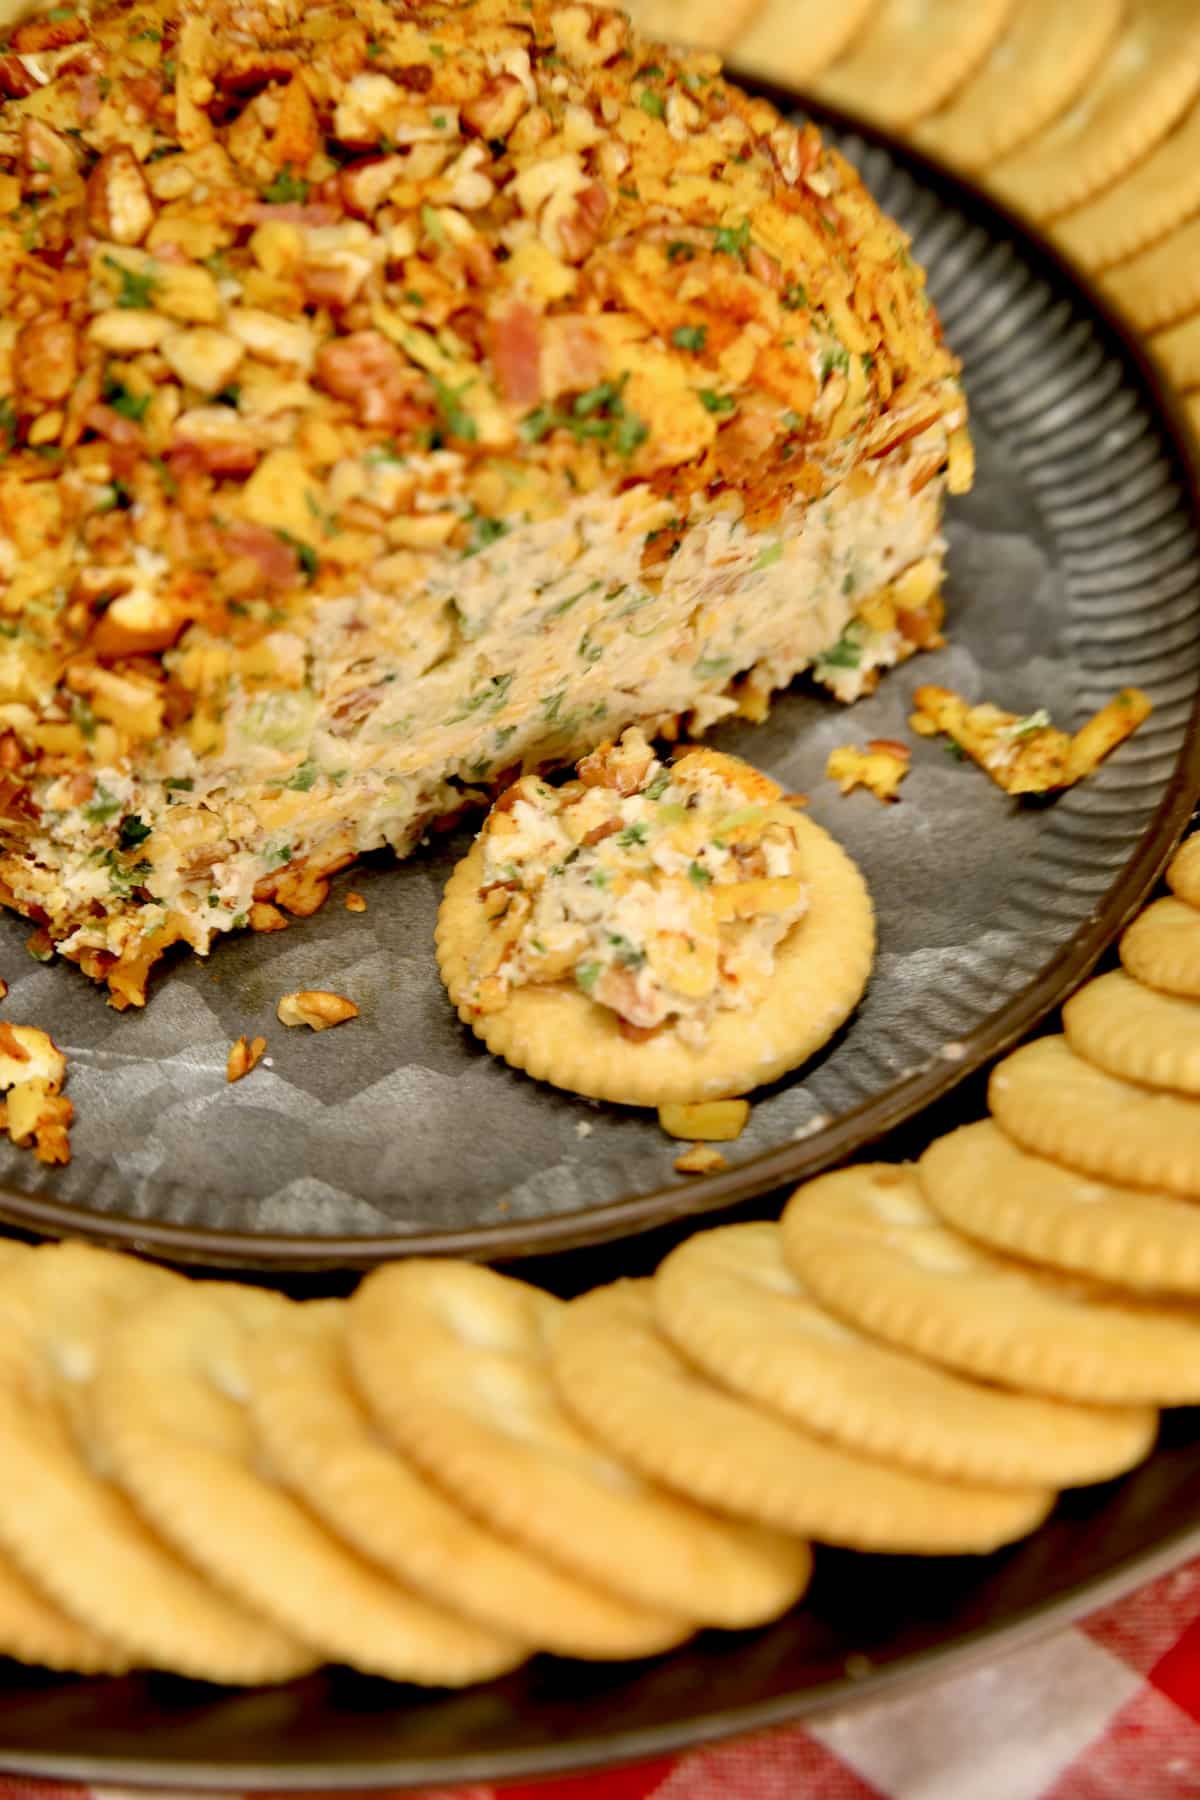 Jalapeno Popper Cheese ball on a platter with crackers.